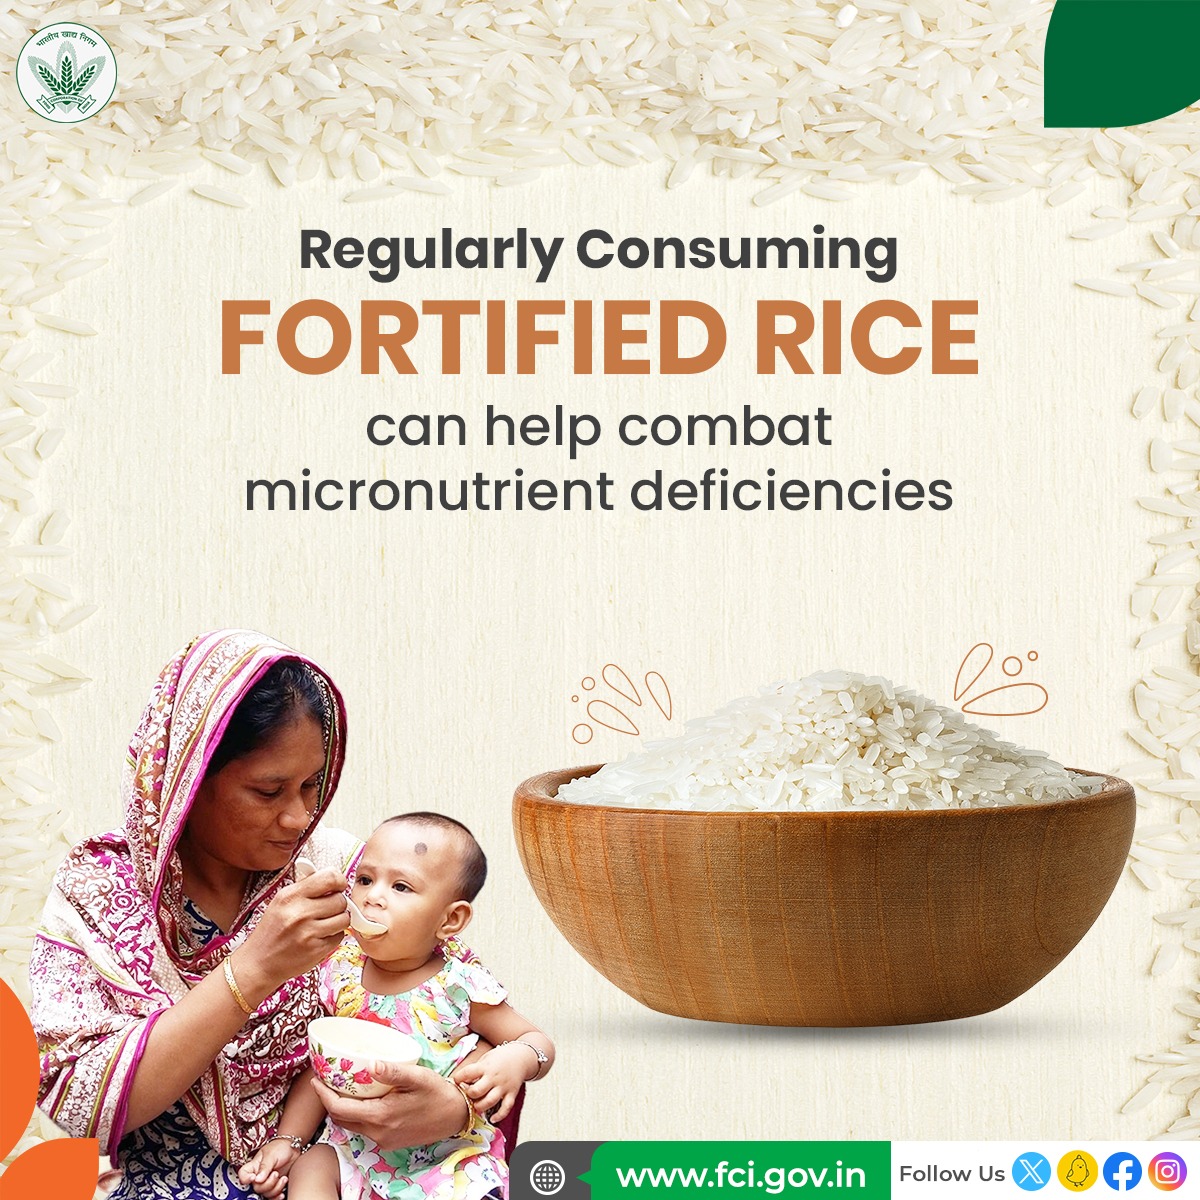 Fortified rice, enriched with iron, folic acid, and vitamin B12, FRK premix, is prepared by mixing it with regular rice. The Food Corporation of India distributes this rice to people through anganwadi centres, schools, and public distribution system (PDS) outlets.